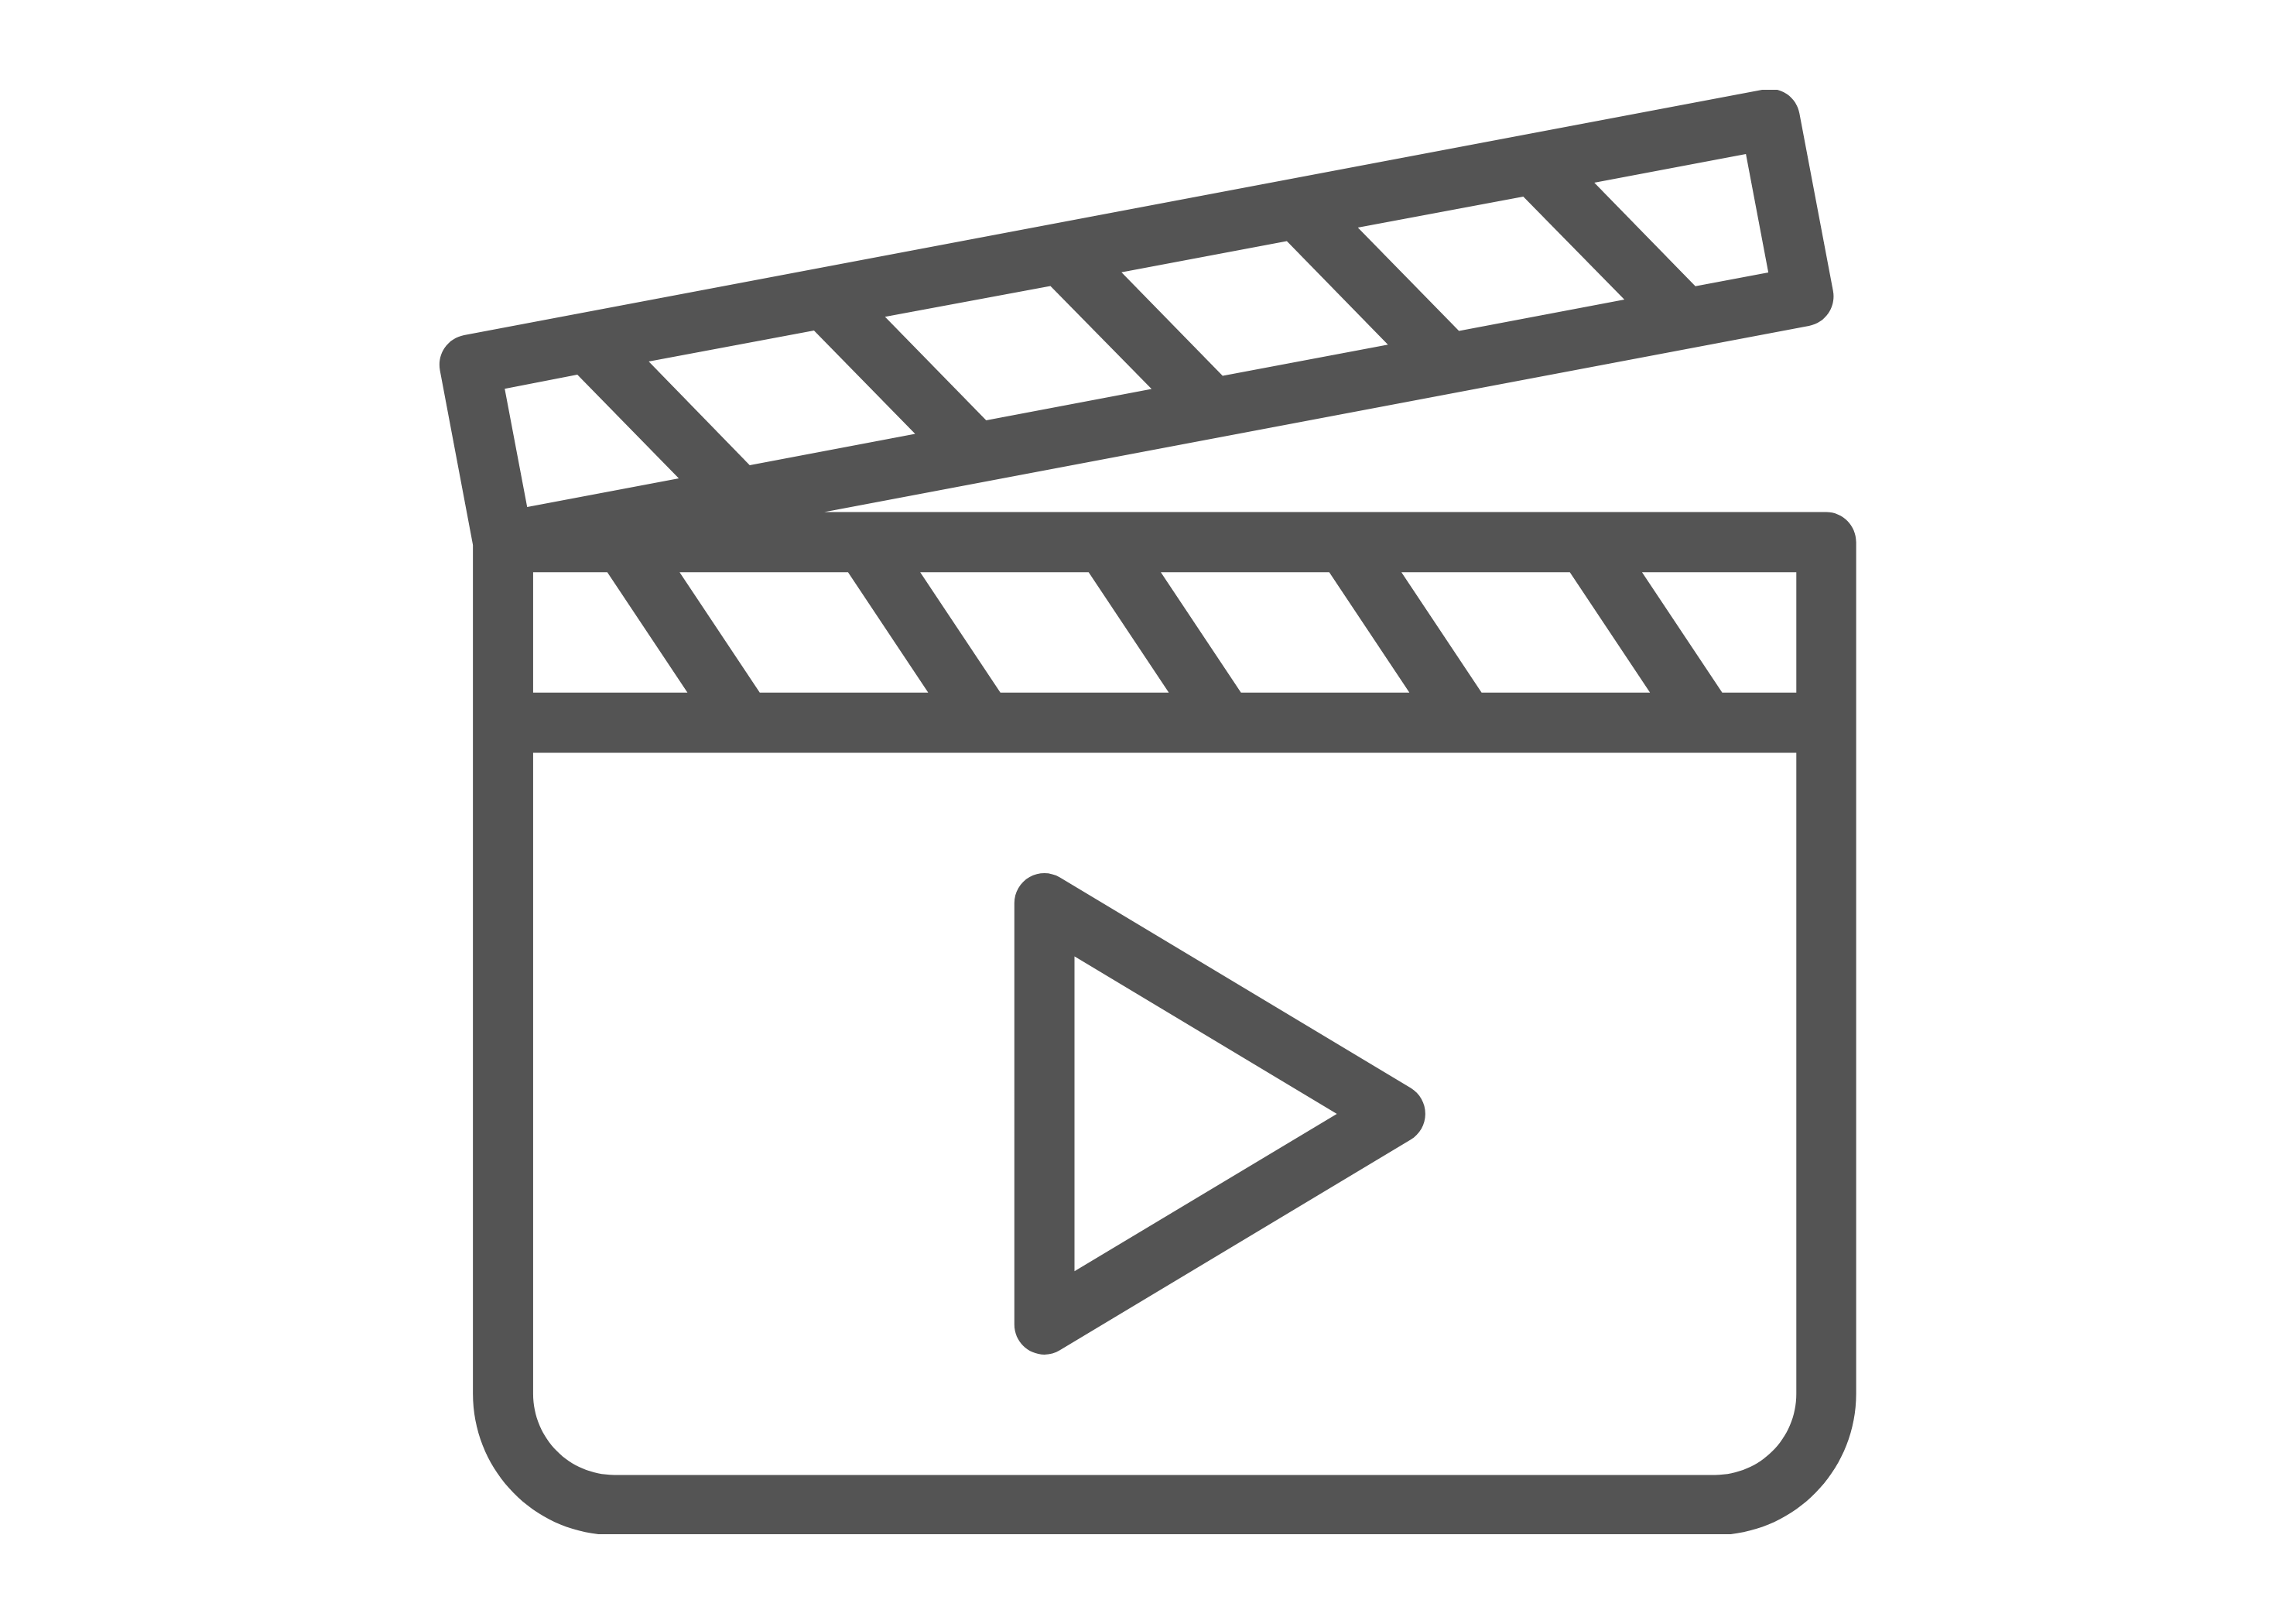 Grey Video Icon on a white background informing about Free Video of the ashes sealing process